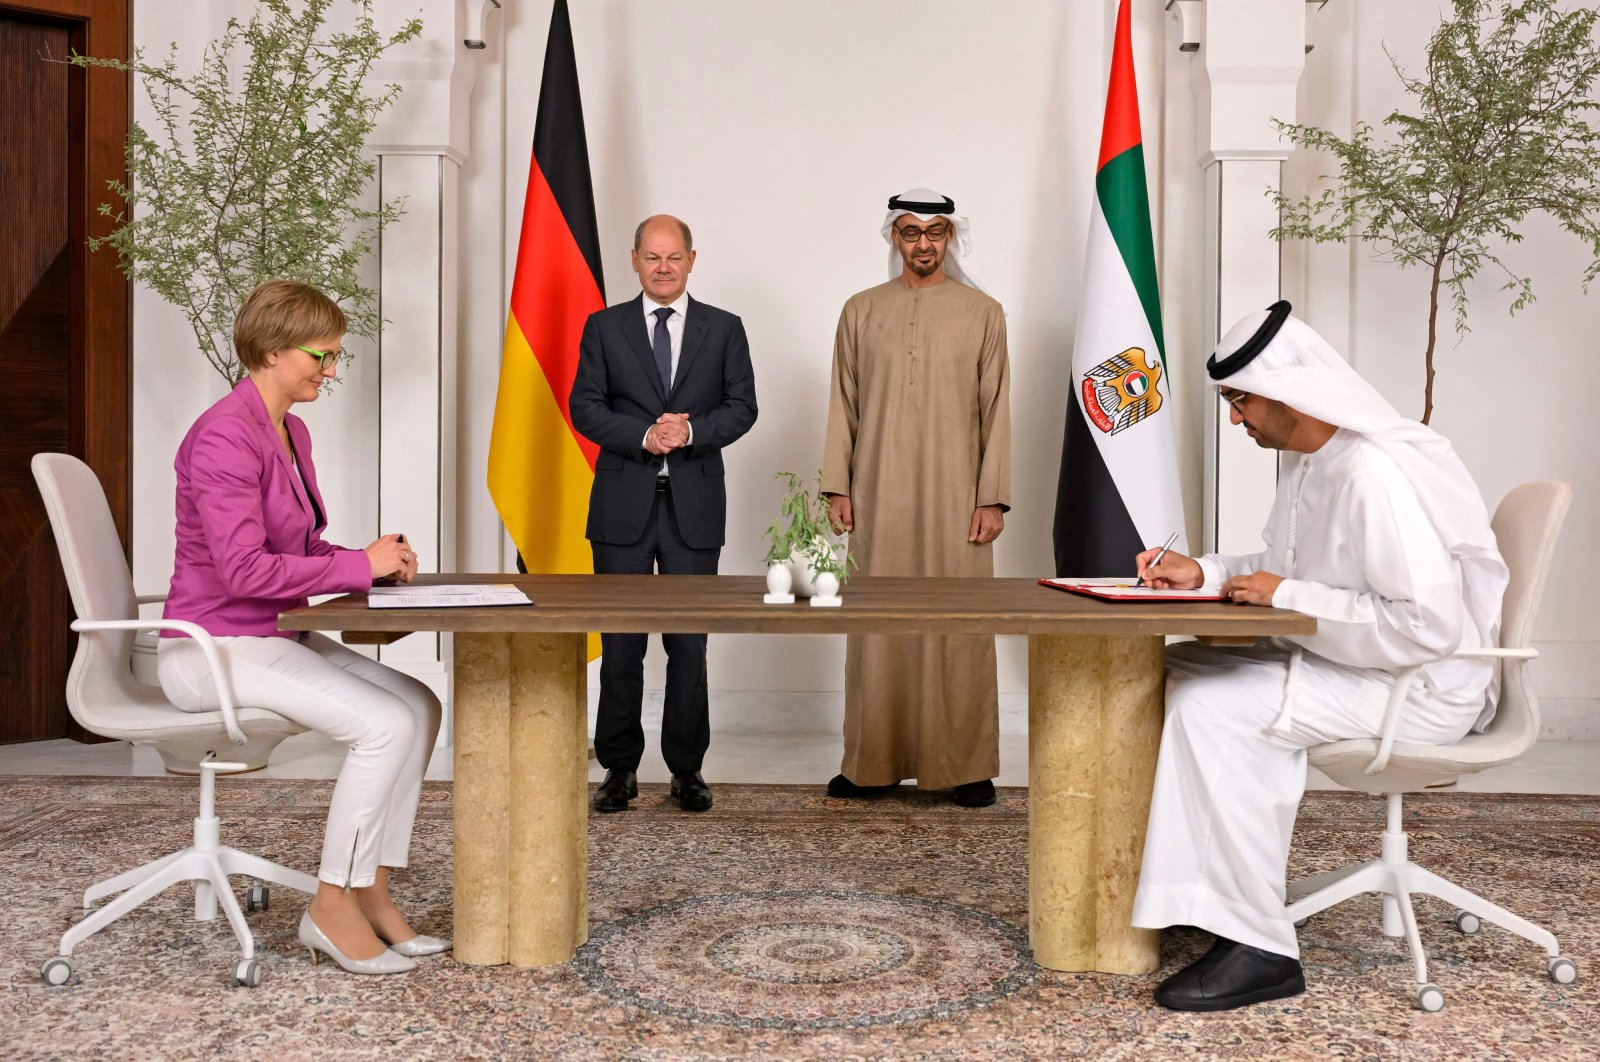  United Arab Emirates President Sheikh Mohammed bin Zayed Al Nahyan and German Chancellor Olaf Scholz oversee the signing of a New Energy Security and Industry Accelerator agreement in Abu Dhabi, UAE, Sept. 25, 2022. (Reuters Photo)